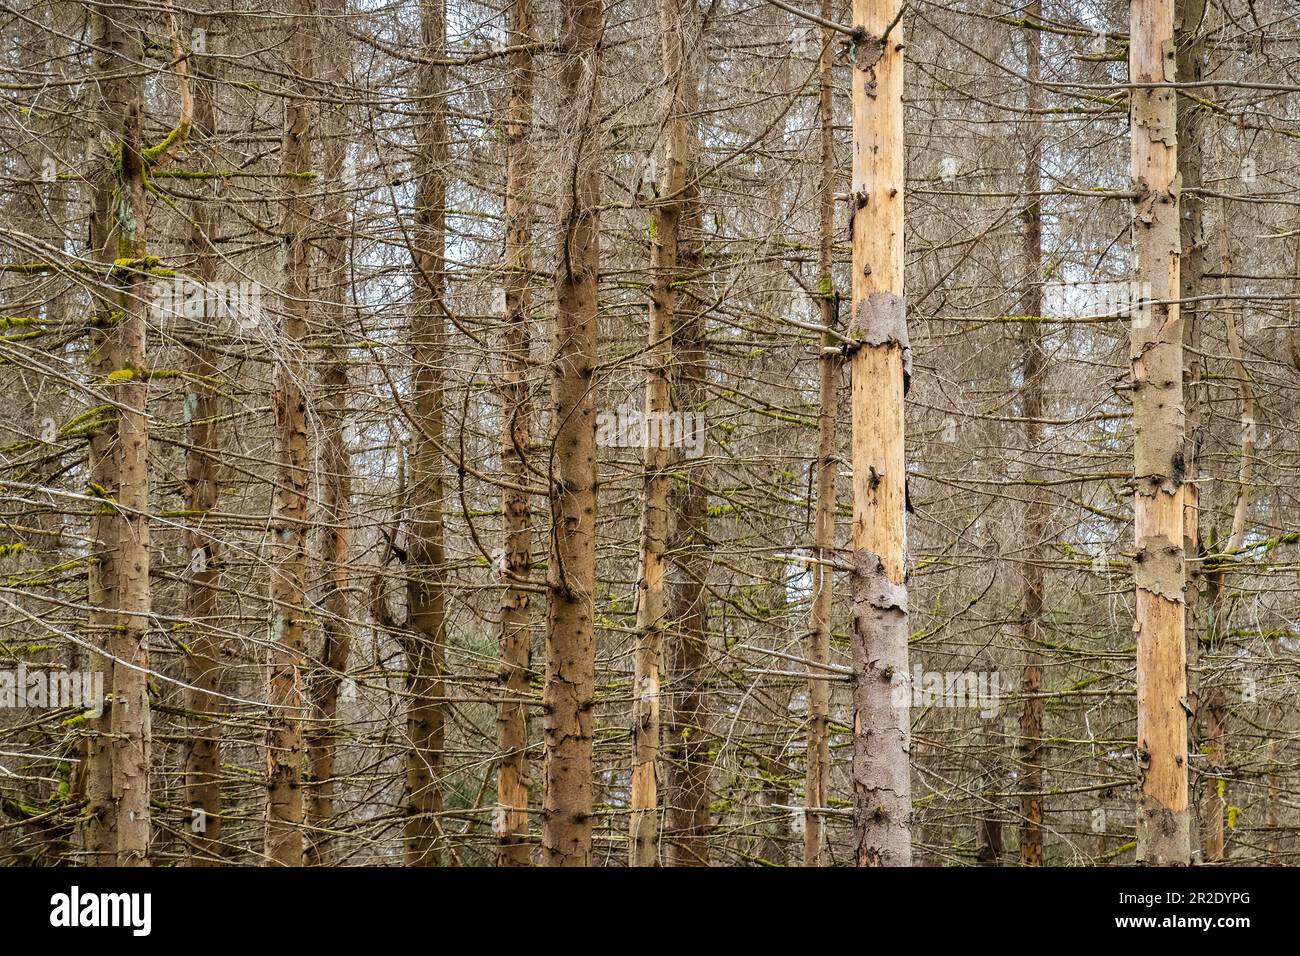 Forest of dead trees. Forest dieback in the Harz National Park, Lower Saxony, Germany. Dying spruce trees, drought and bark beetle infestation. Stock Photo